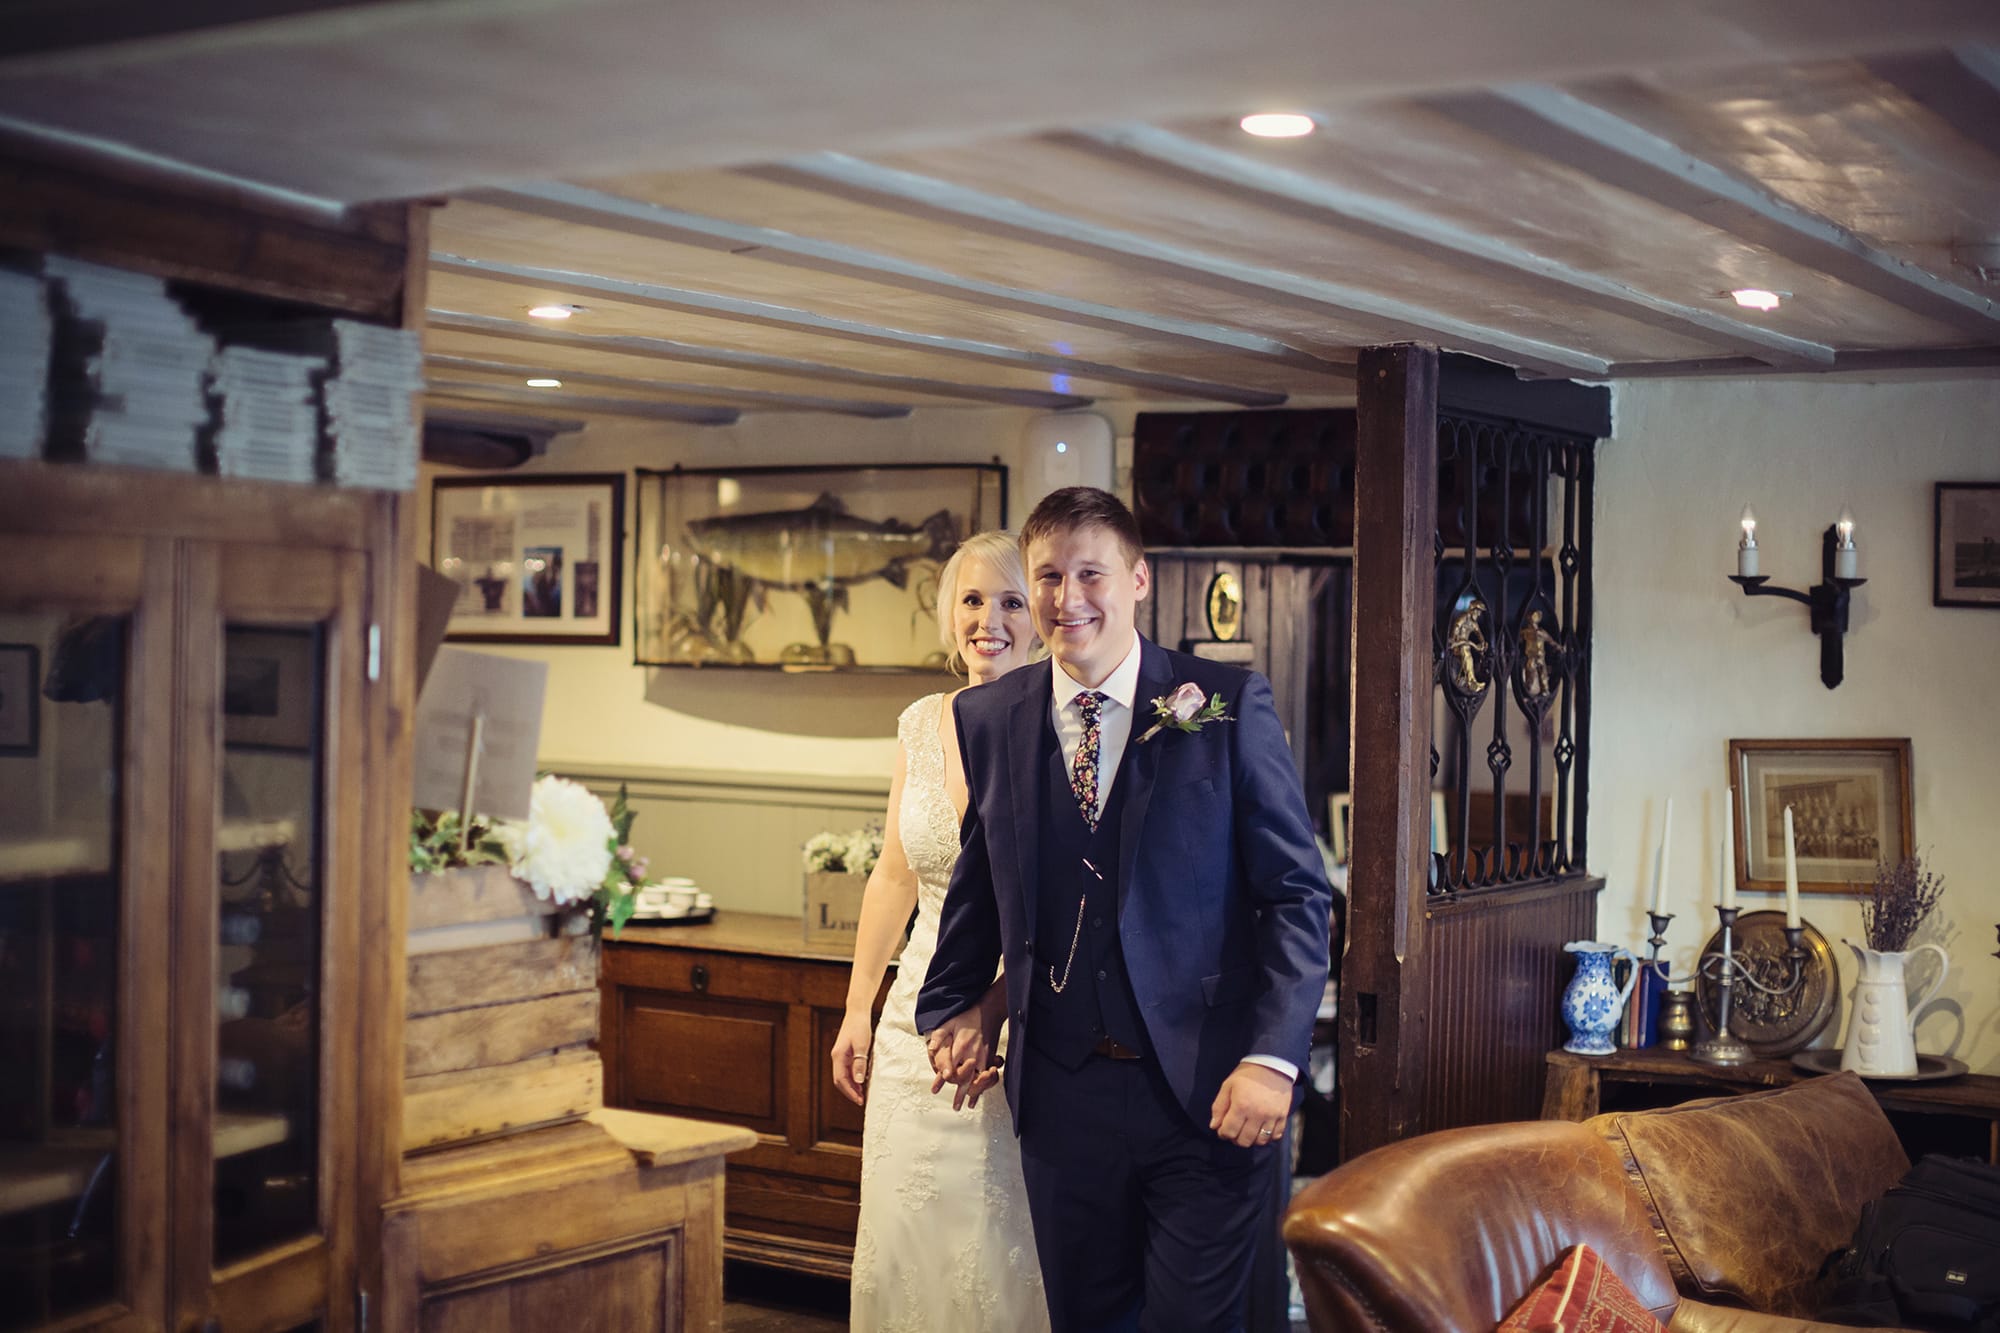 Sweet and Simple UK Wedding featuring Elison: Maggie Bride wearing Elison by Maggie Sottero.